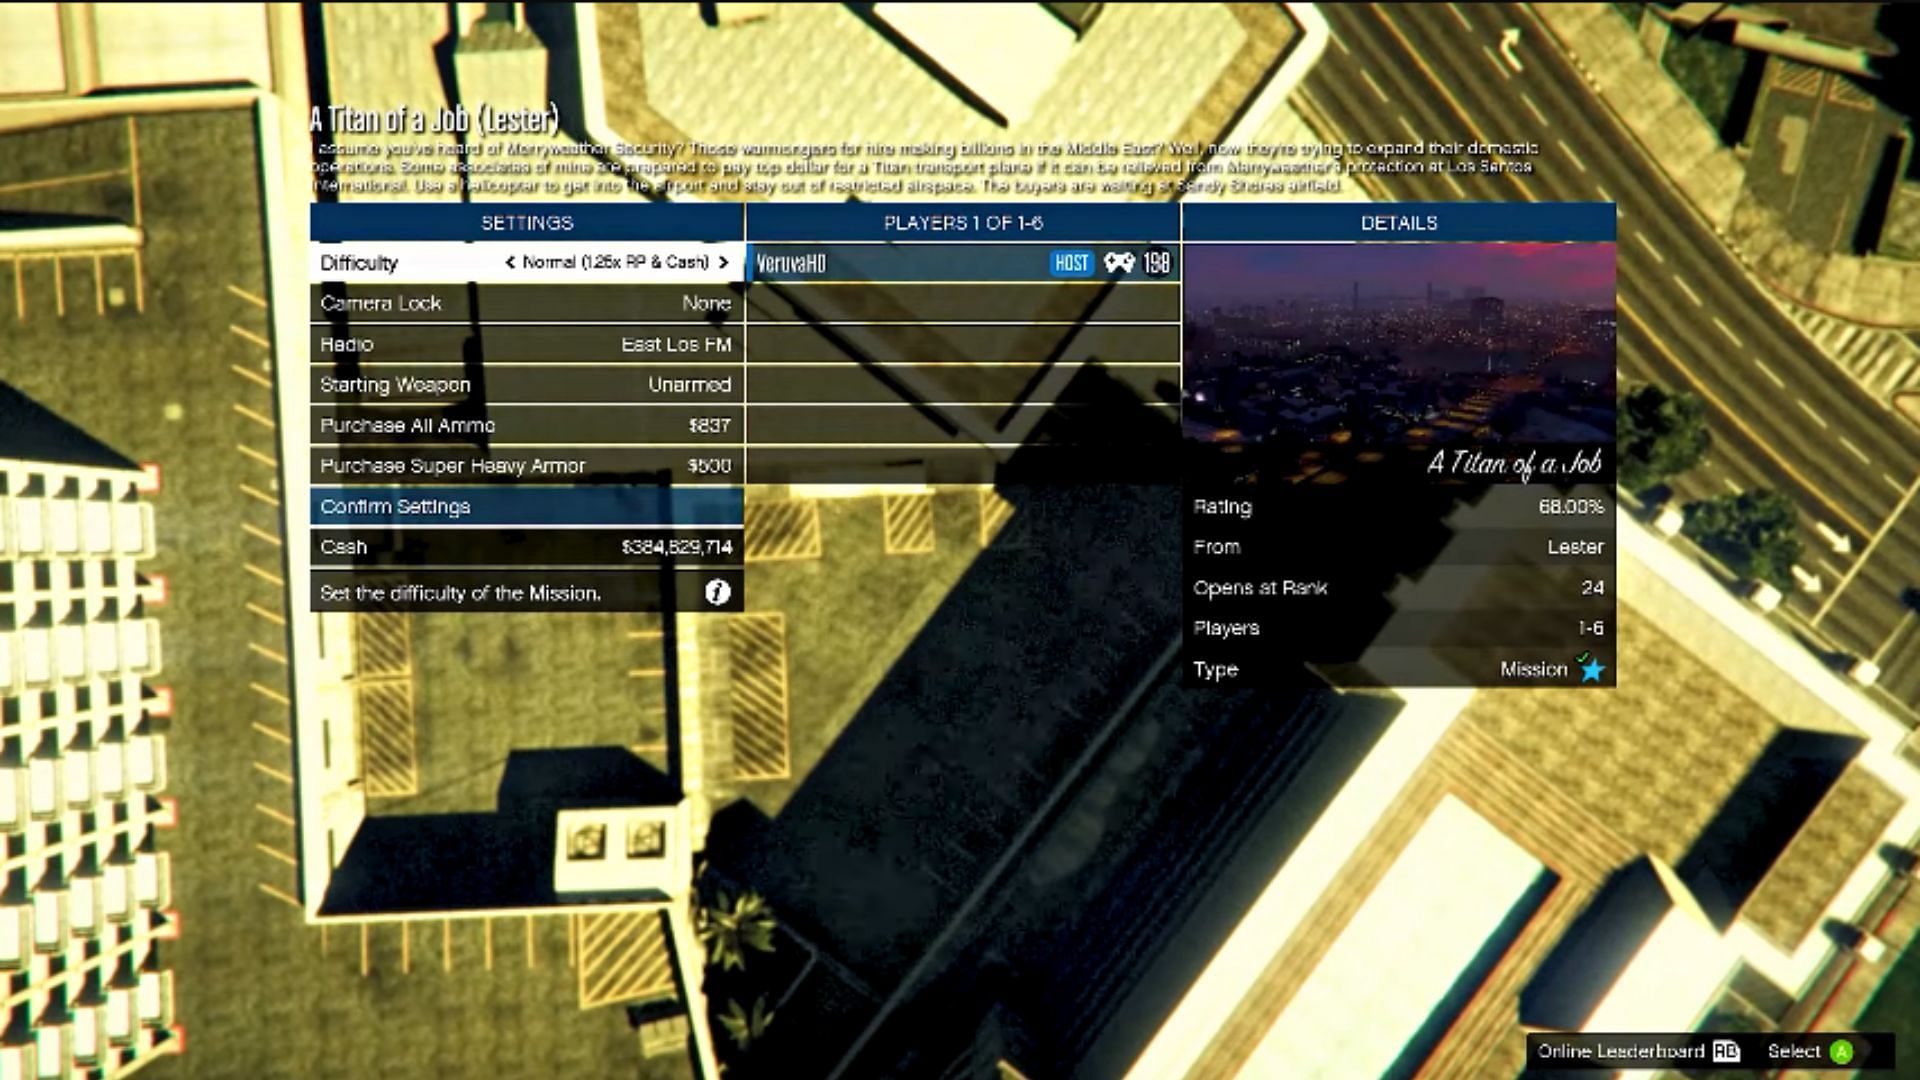 Quit the mission from this menu (Image via YouTube/VeruvaHD)